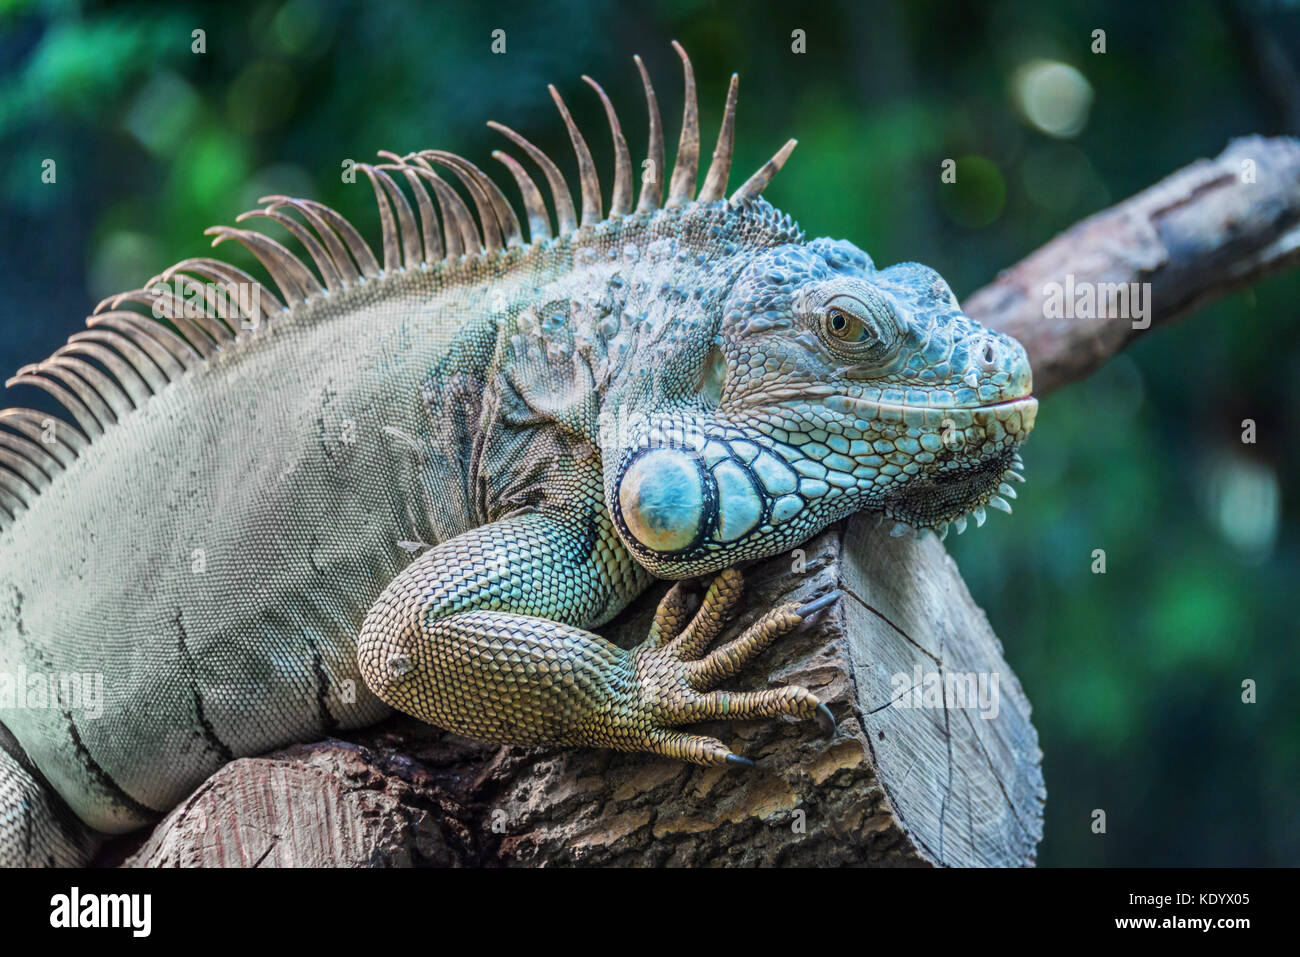 Close up portrait of an iguana looking at the camera Stock Photo